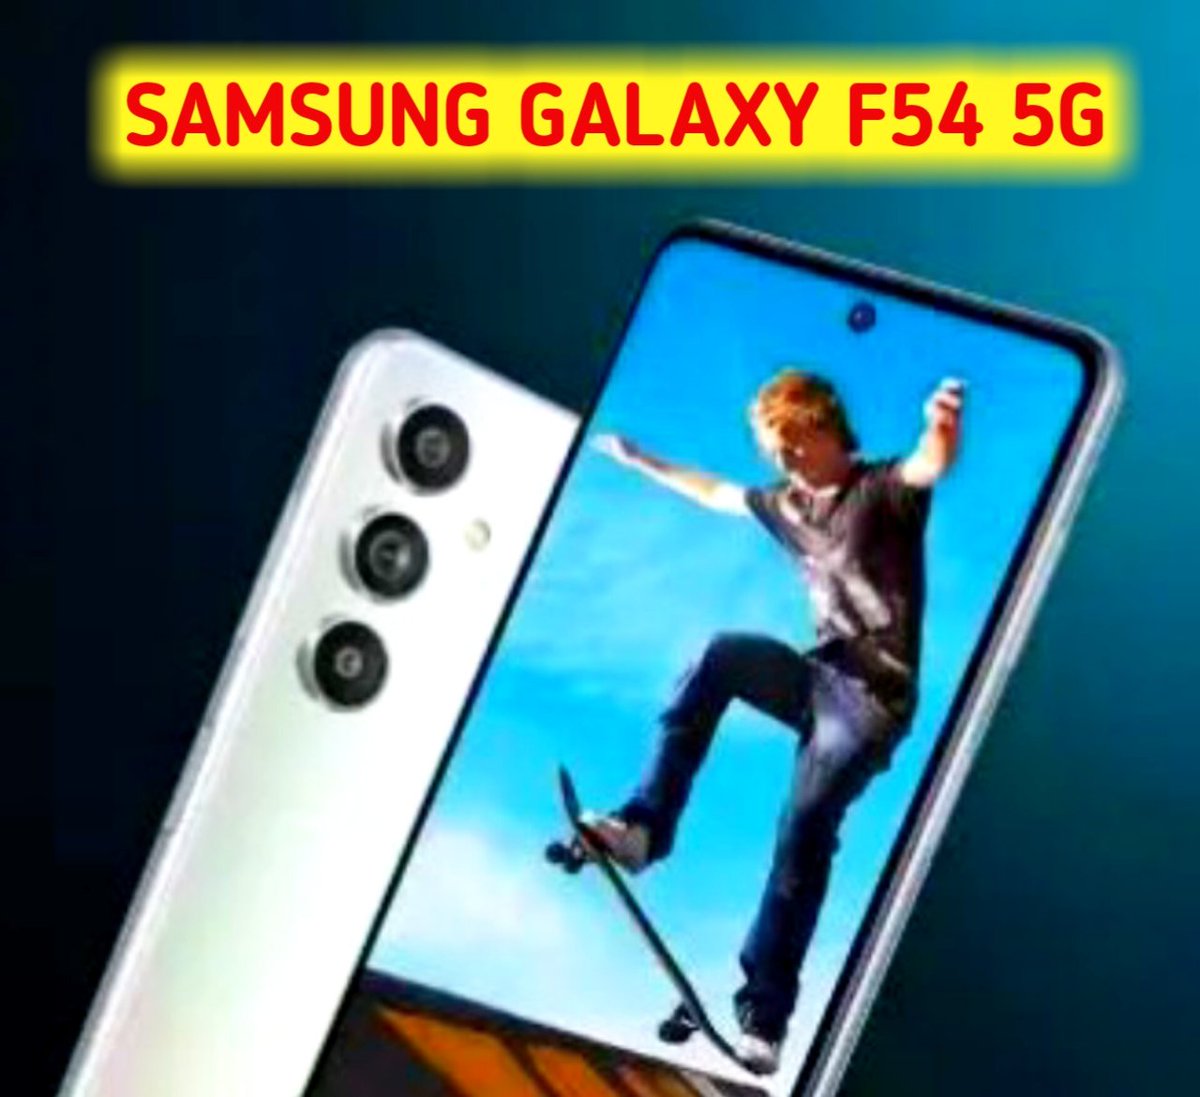 Samsung Galaxy F54 gets February 2024 Security Update 

🔥Available : INDIA 🇮🇳 🇮🇳 🇮🇳

• Version : E546BXXS4BXB1
• Size : 248.25MB
• Security Patch Level : 1 February 2024

#SAMSUNG
#GalaxyF54
#February2024Security